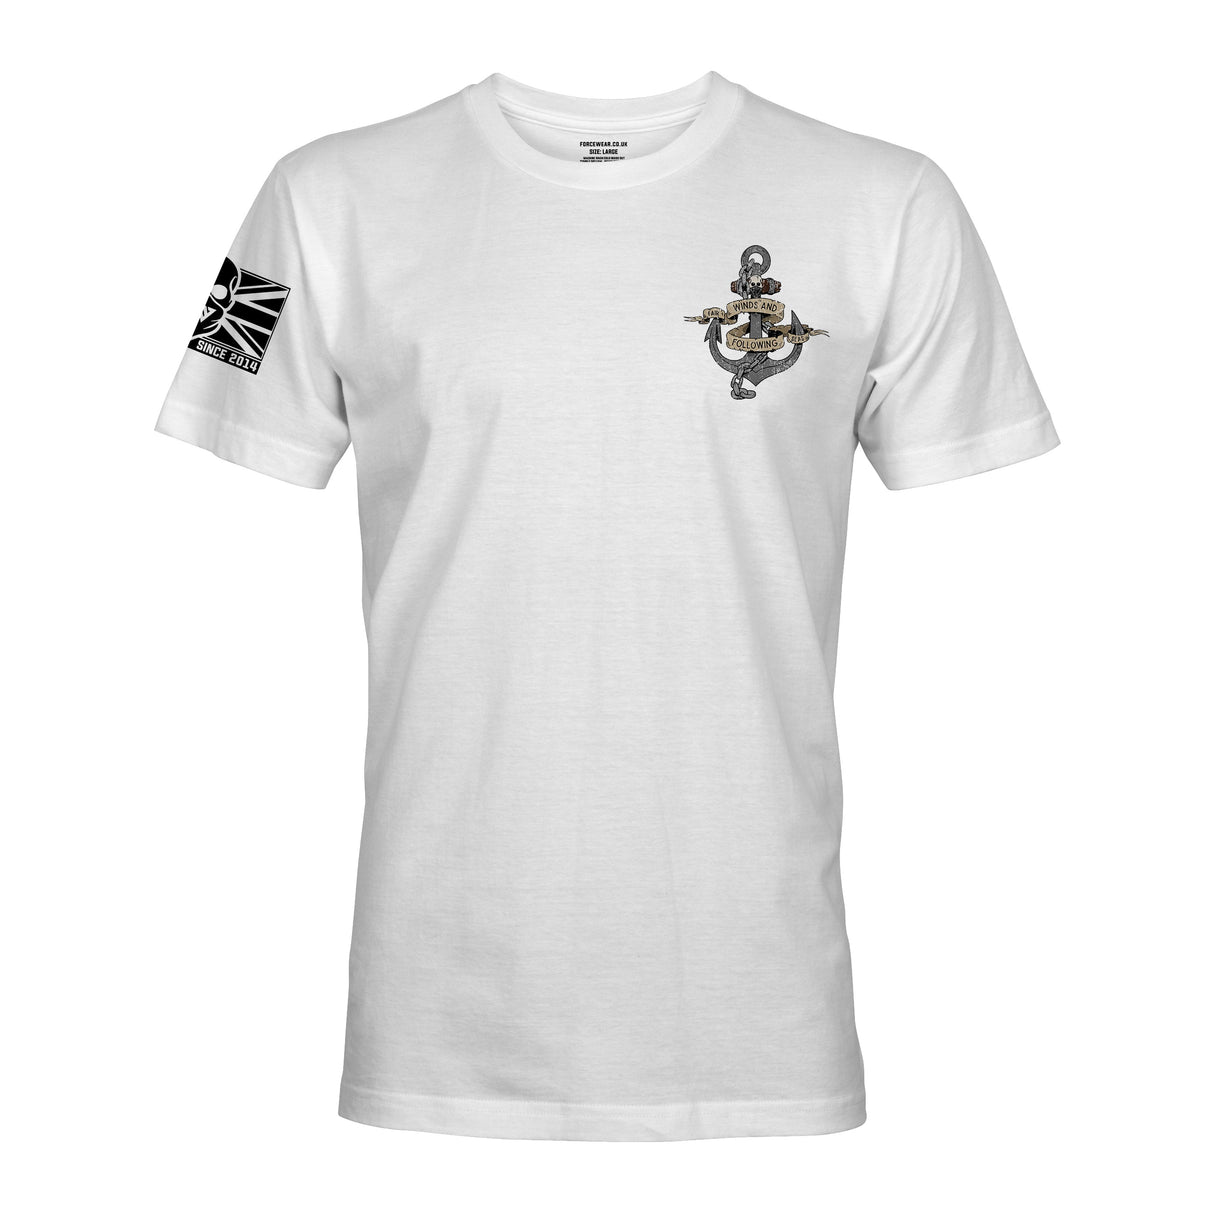 FAIR WINDS AND FOLLOWING SEAS - Force Wear HQ - T-SHIRTS